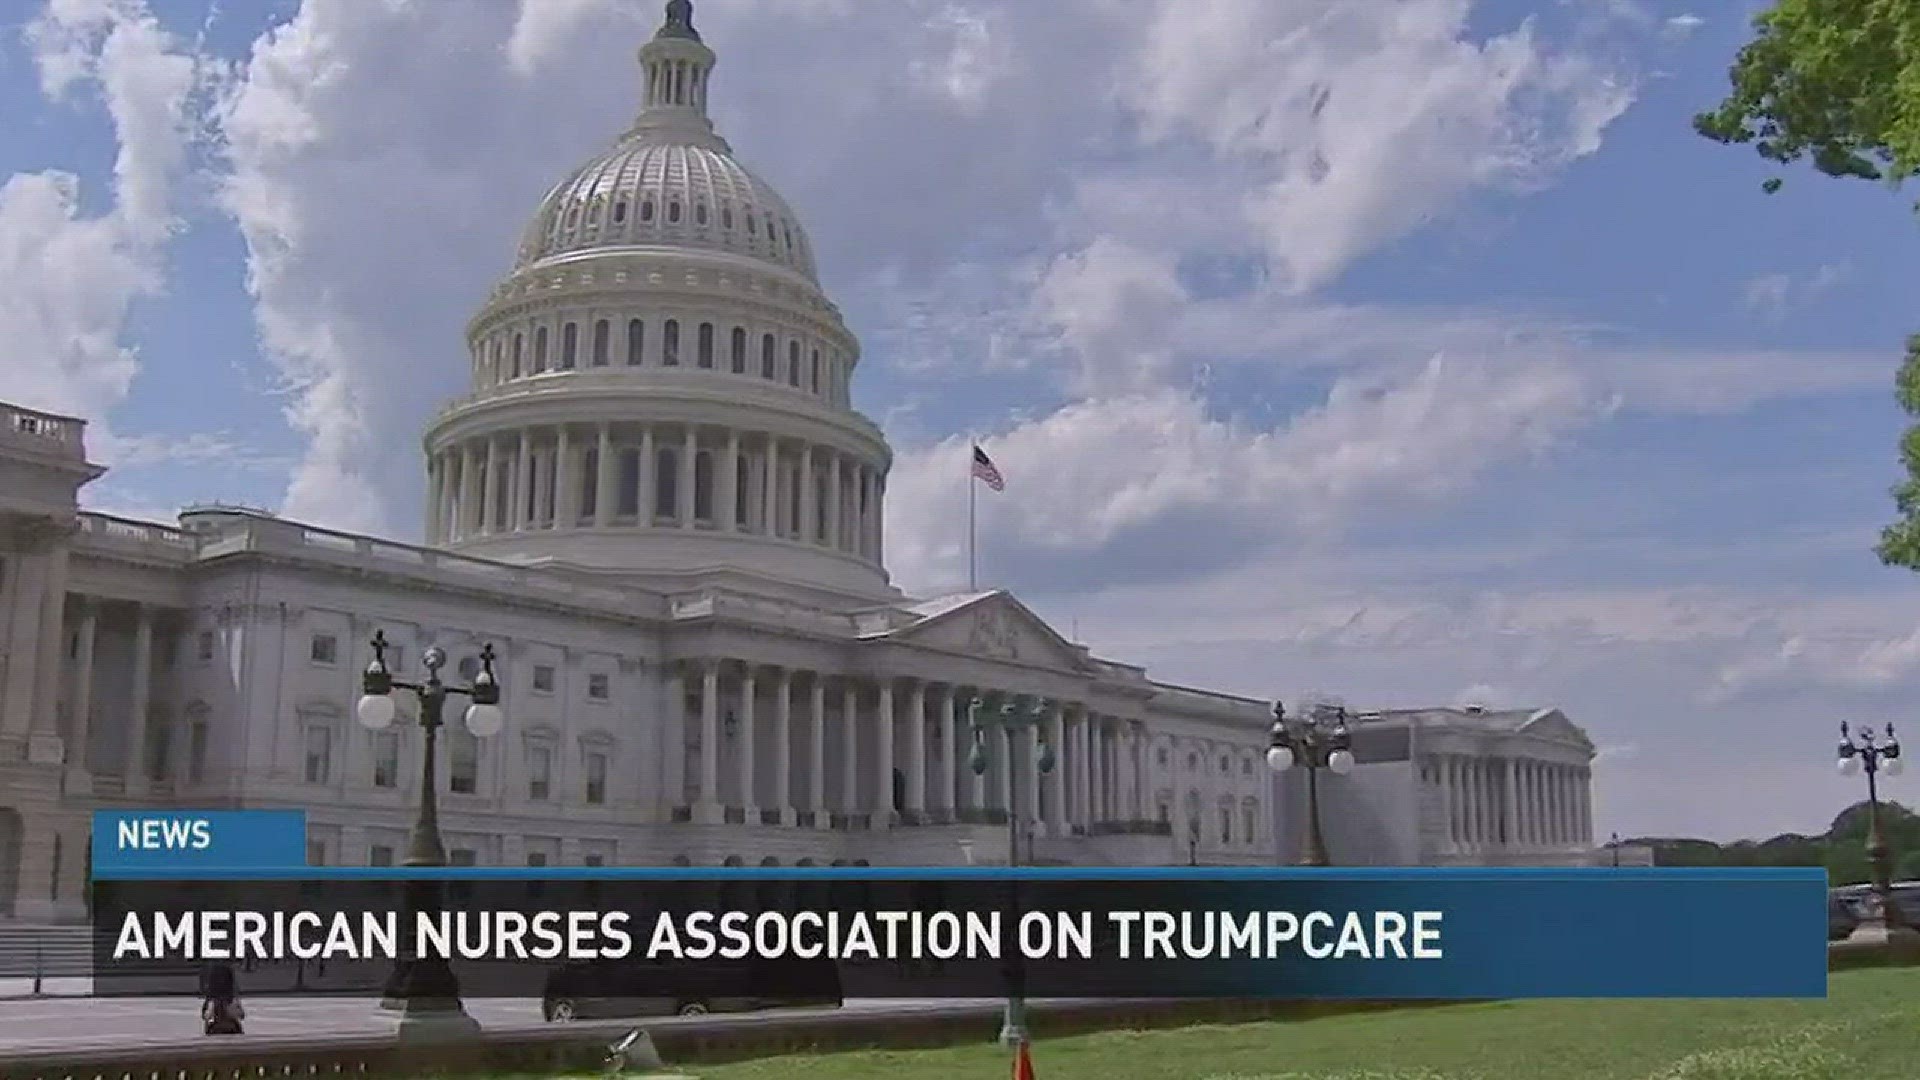 Nurses from all across America are at the nation's capital, angry over the GOP's draft of their healthcare bill.